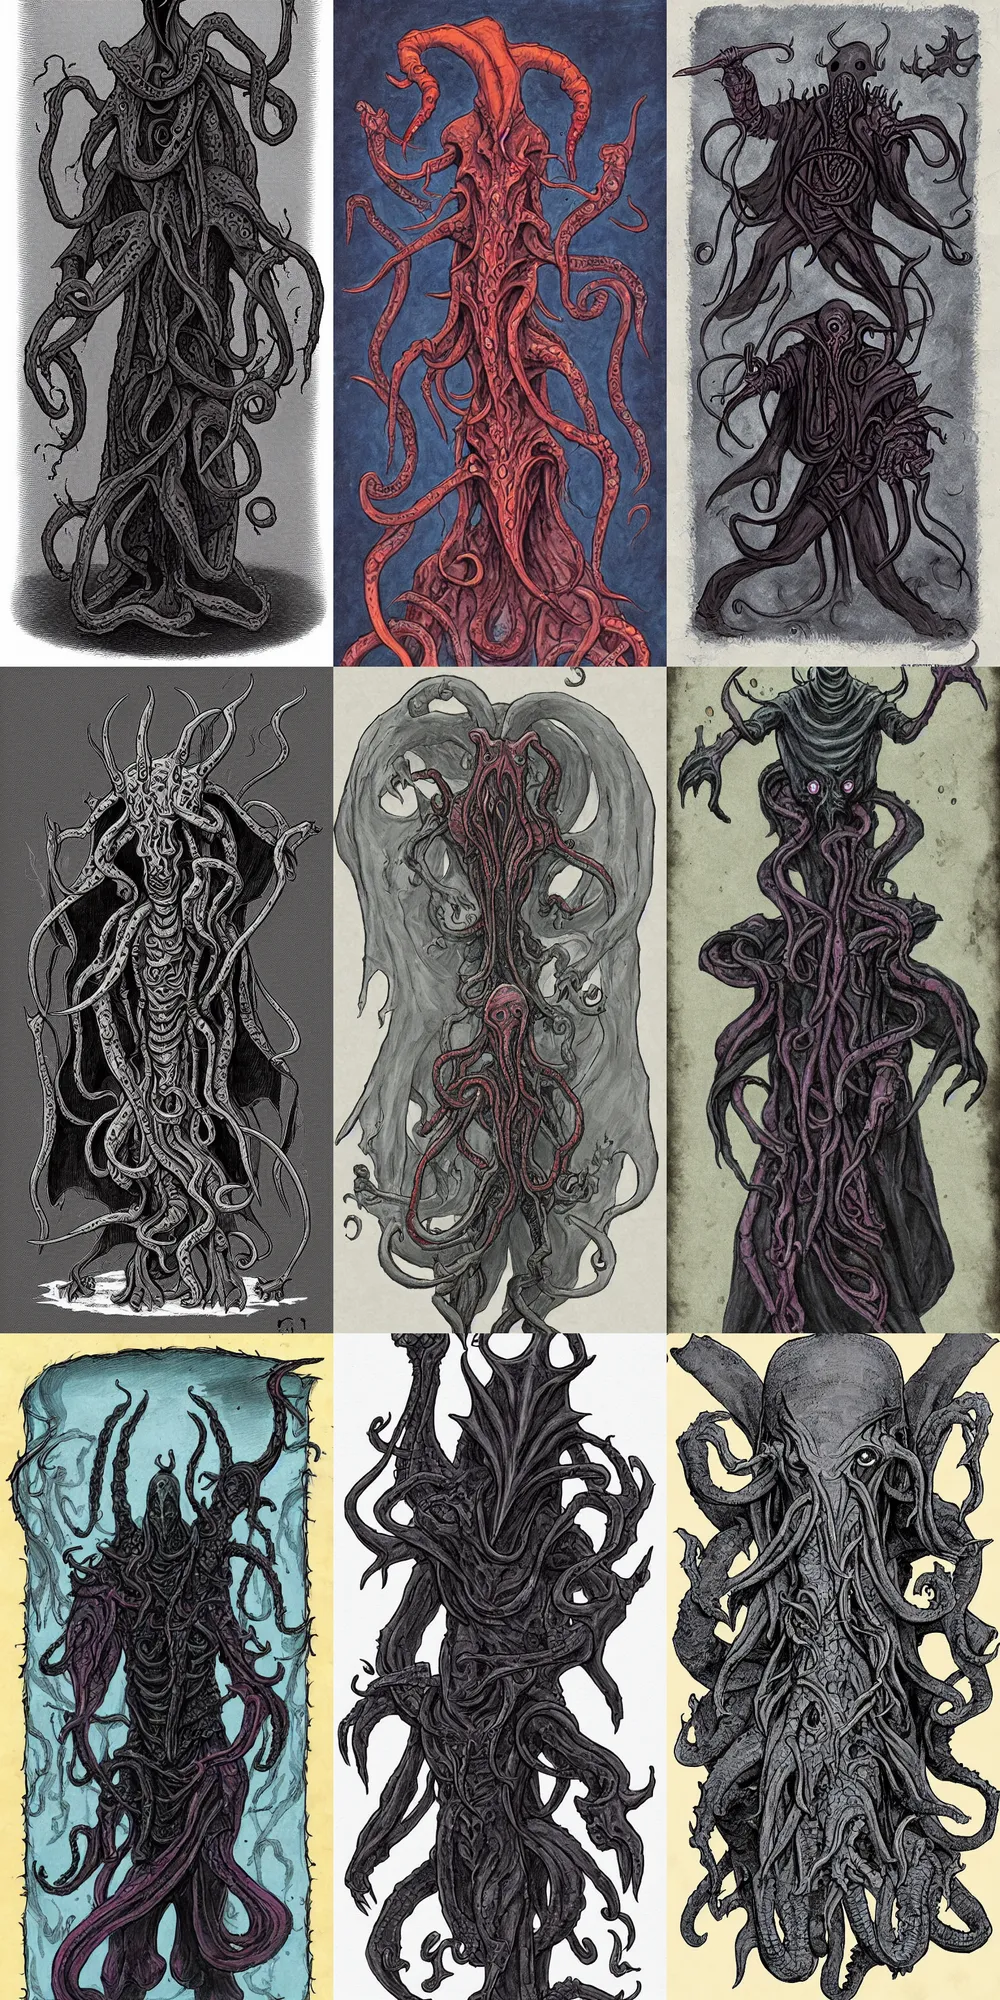 Prompt: Illithid (mind flayer), D&D monster manual, in the style of Goya